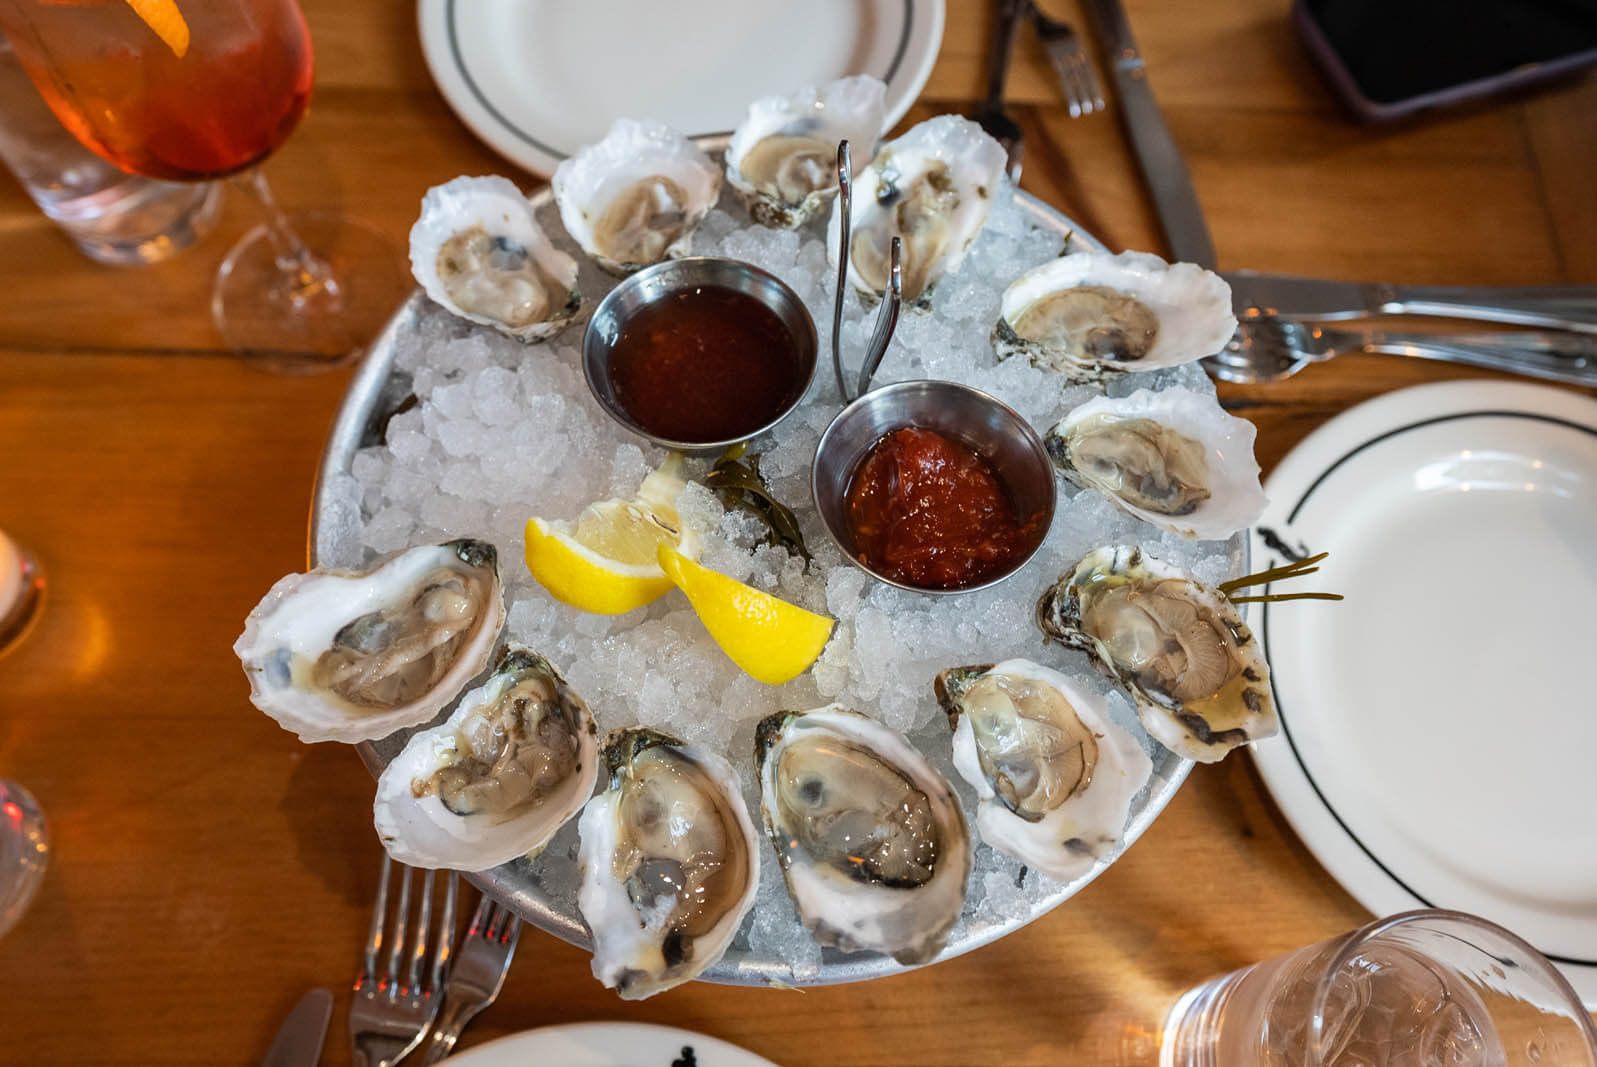 Oyster happy hour from Mermaid Inn in NYC